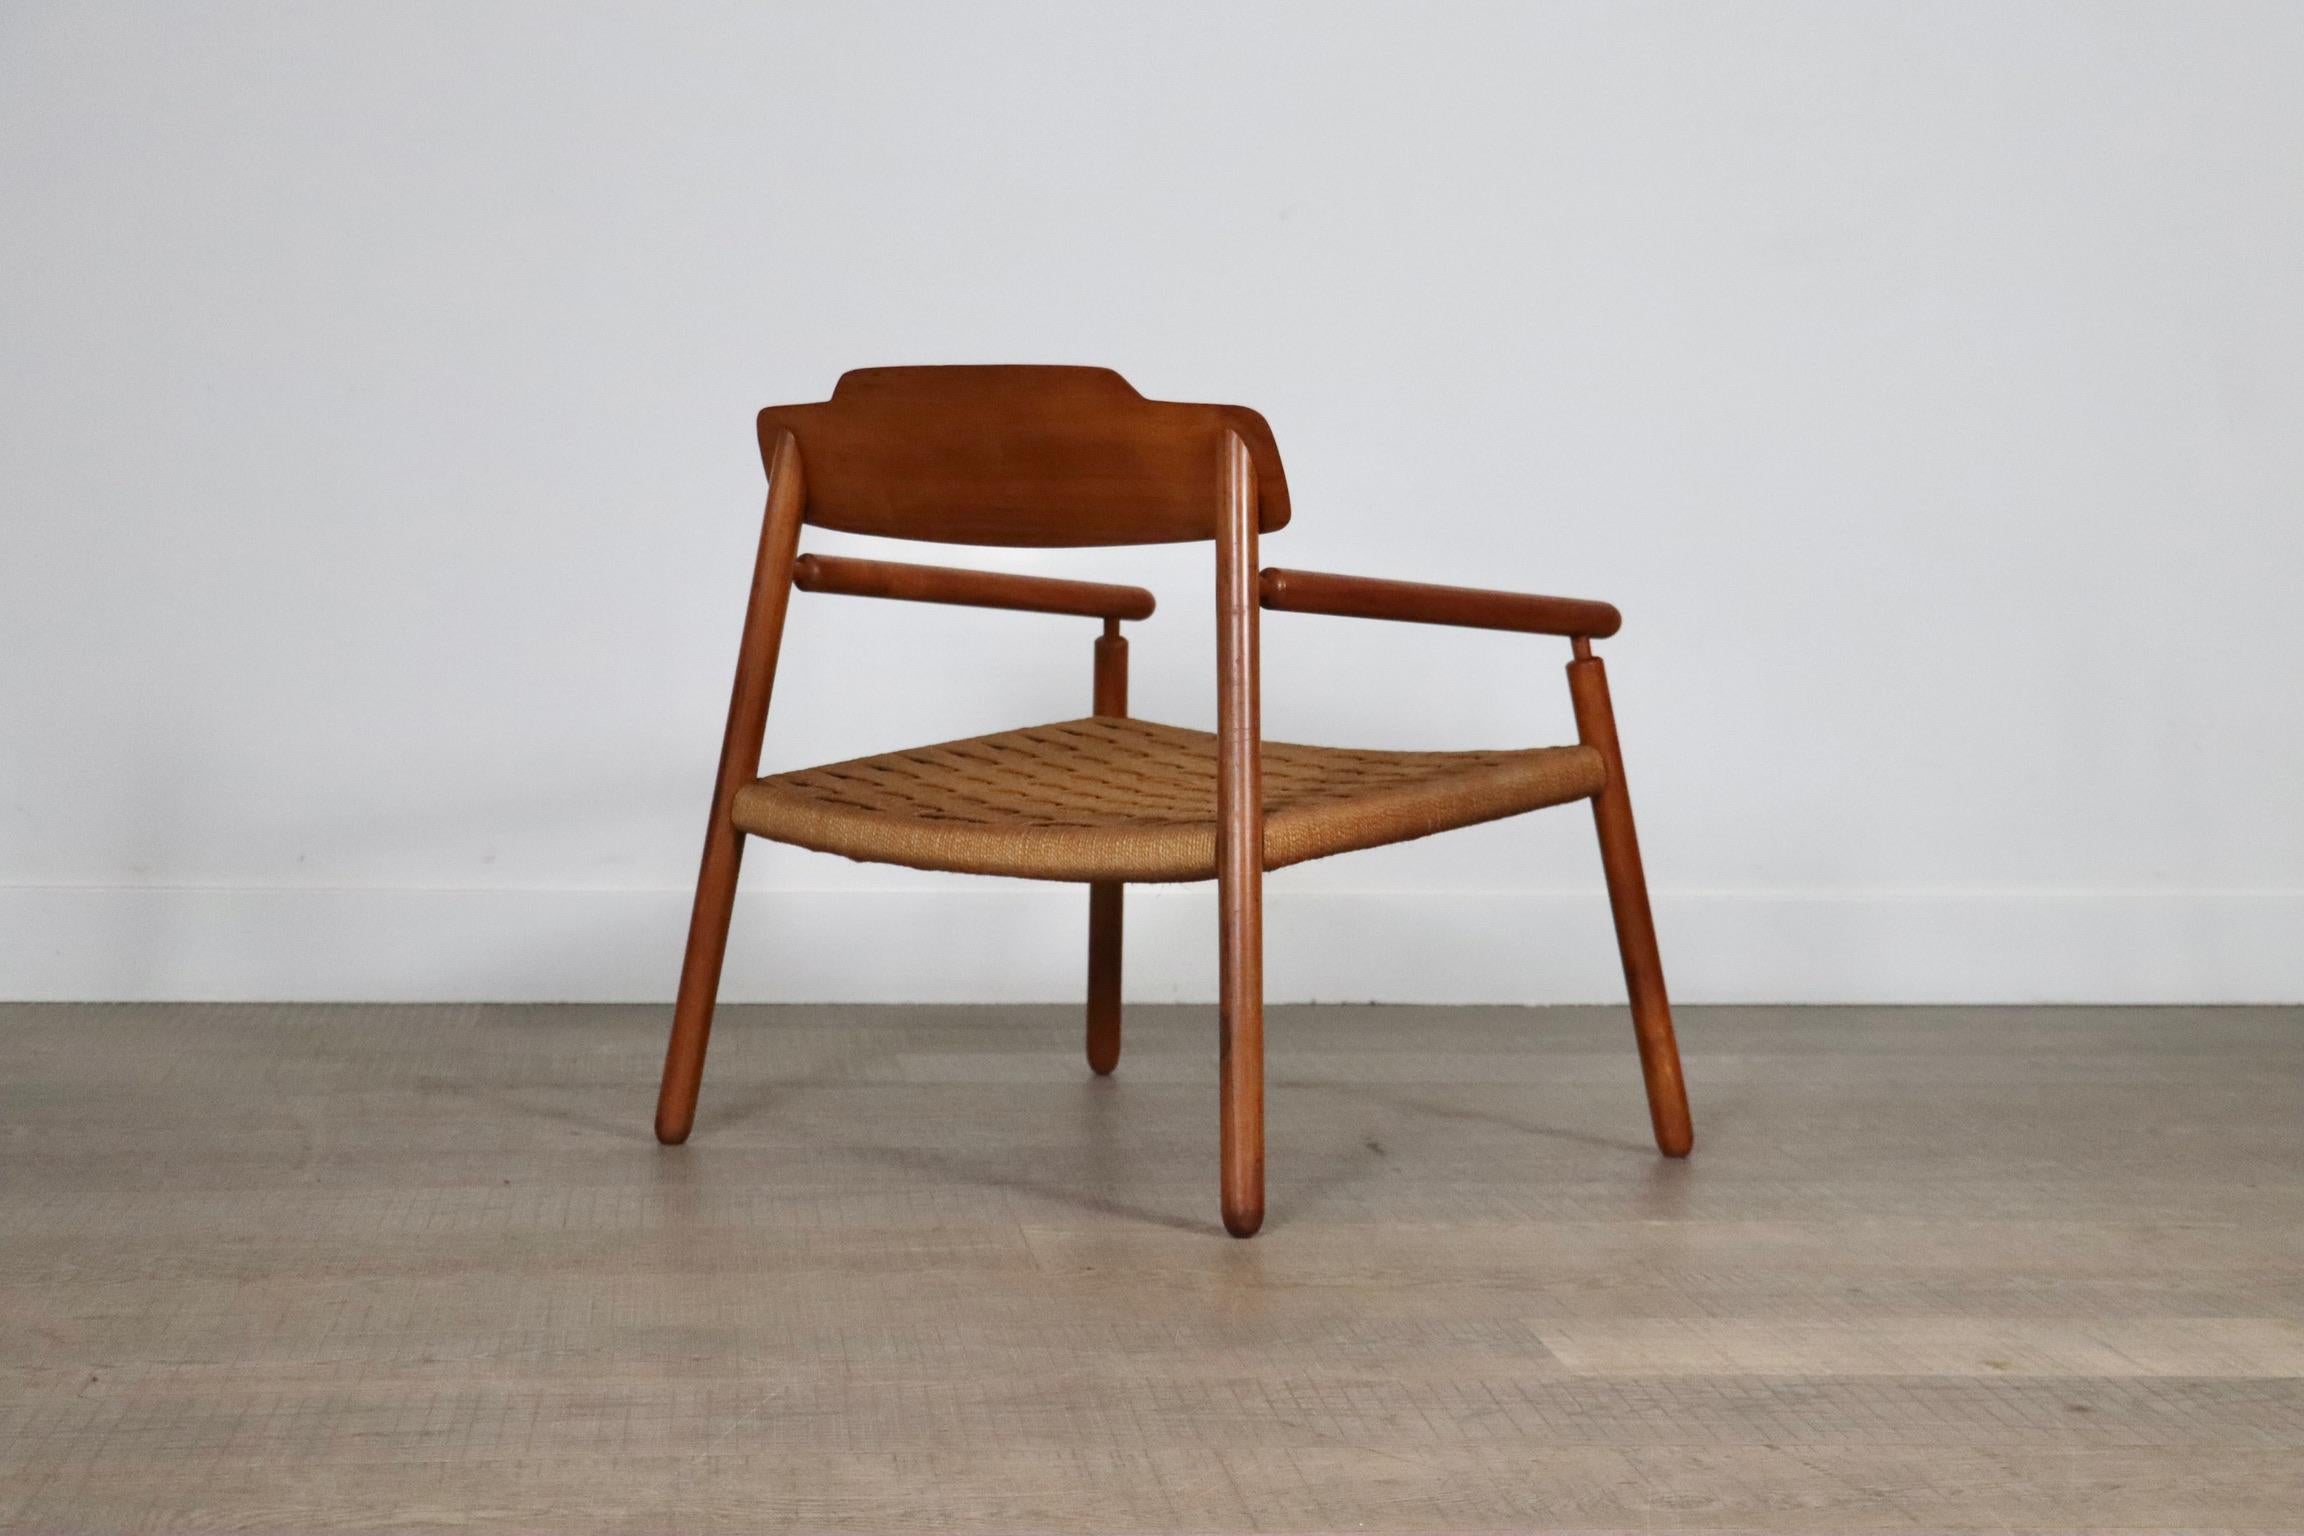 Midcentury Minimalistic Easy Chair In Oak And Papercord, Finland 1950s For Sale 3